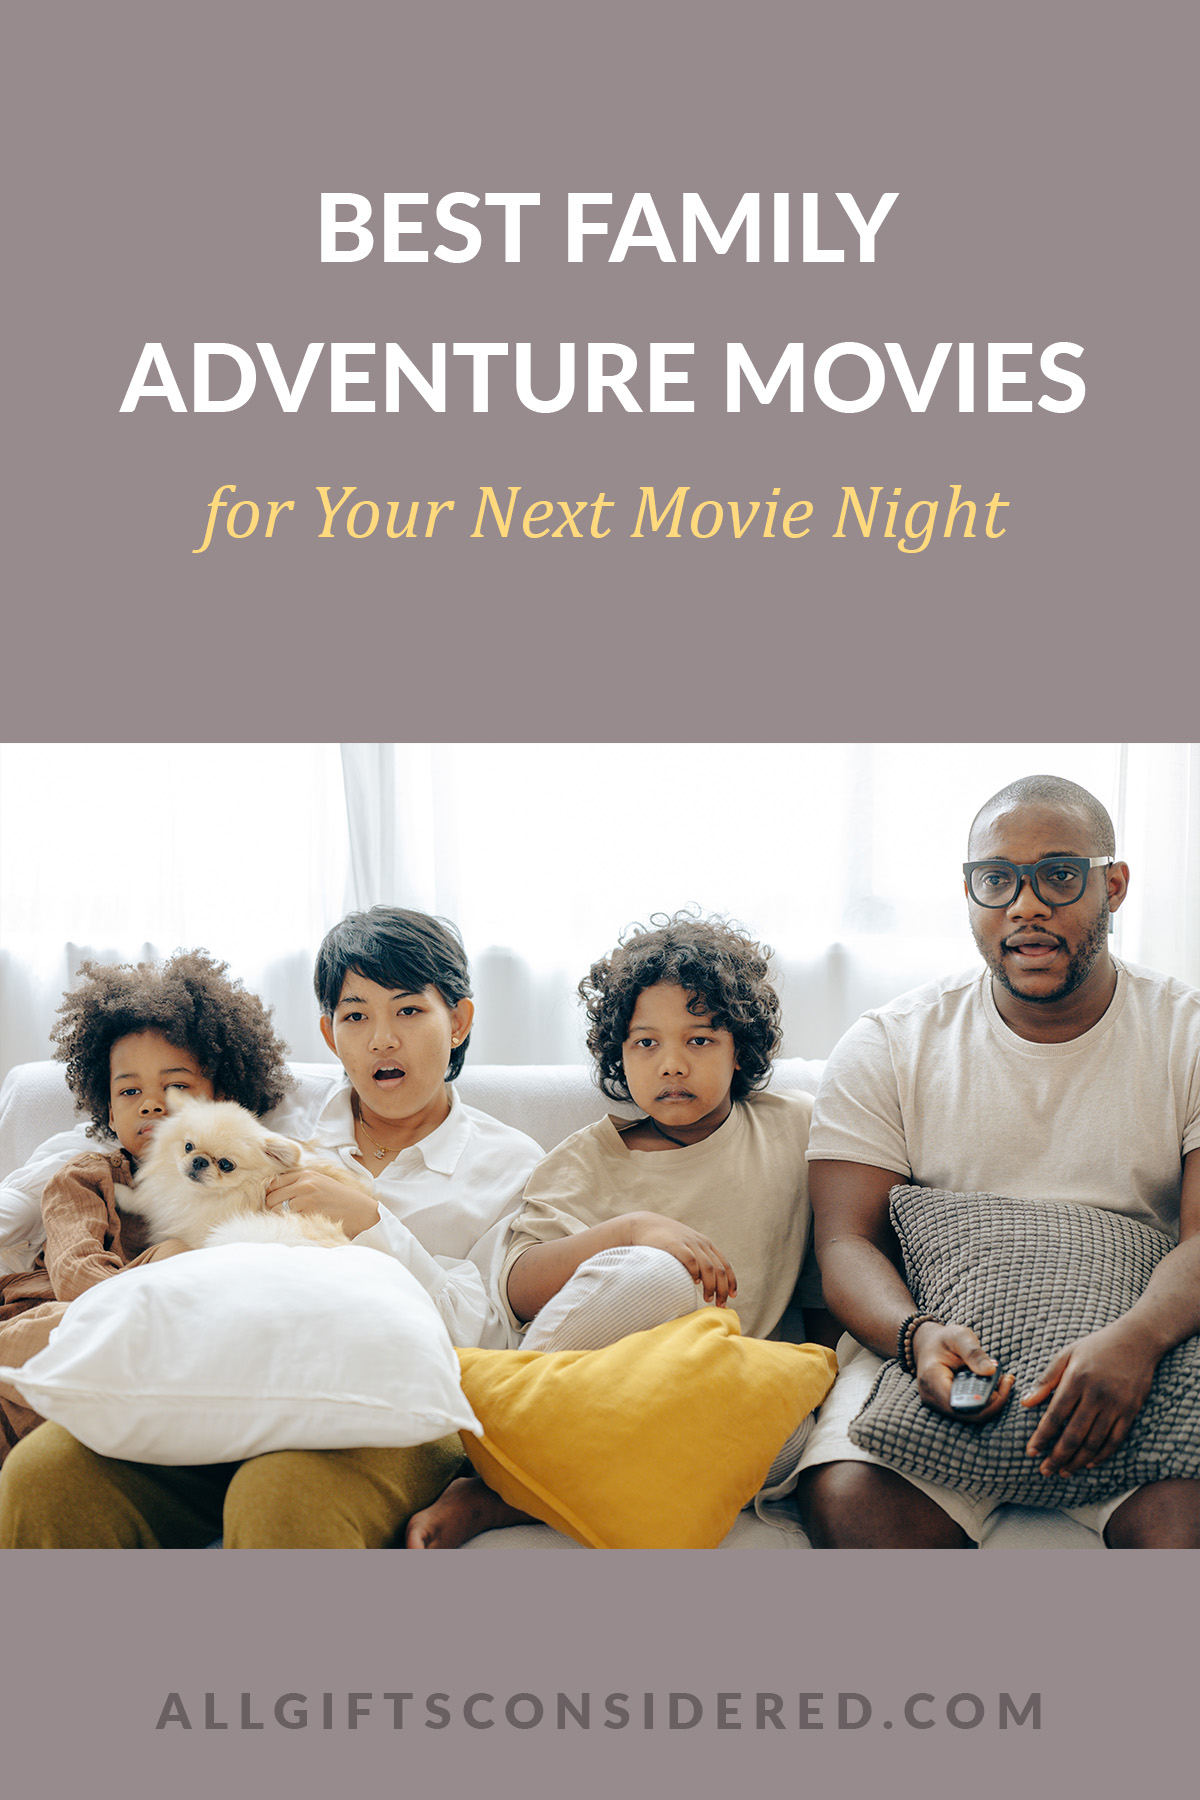 best family adventure movies - feature image